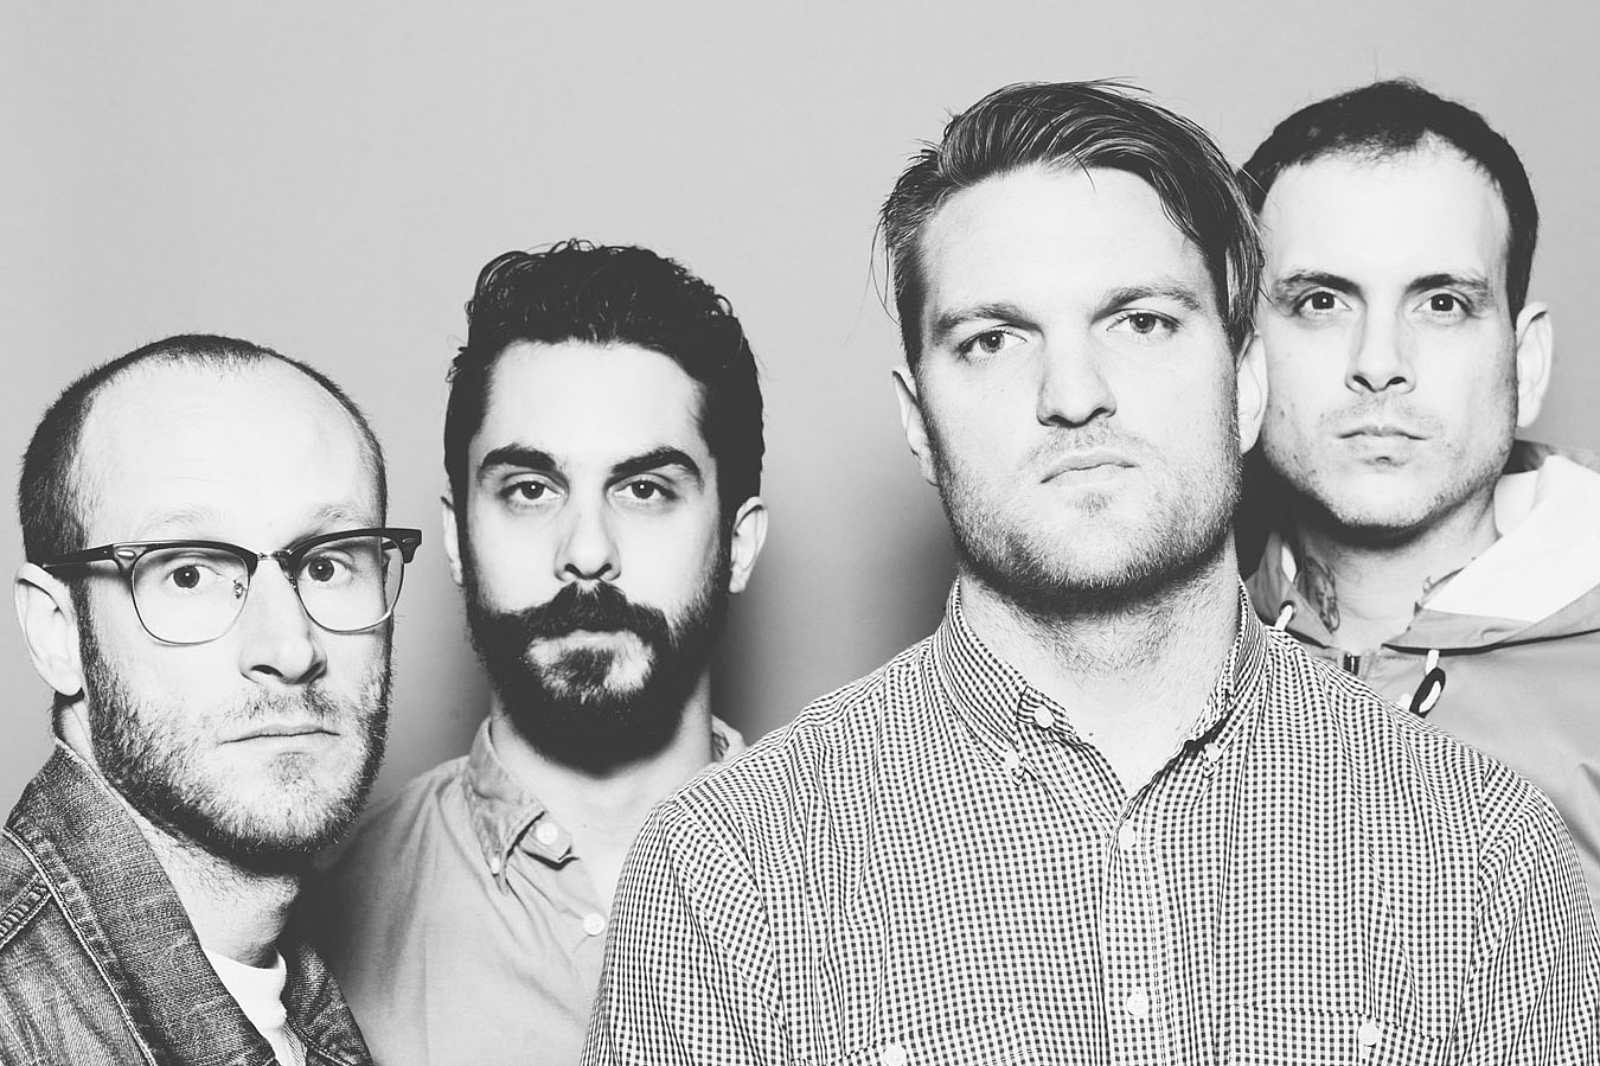 Cold War Kids stream new single, 'All This Could Be Yours'